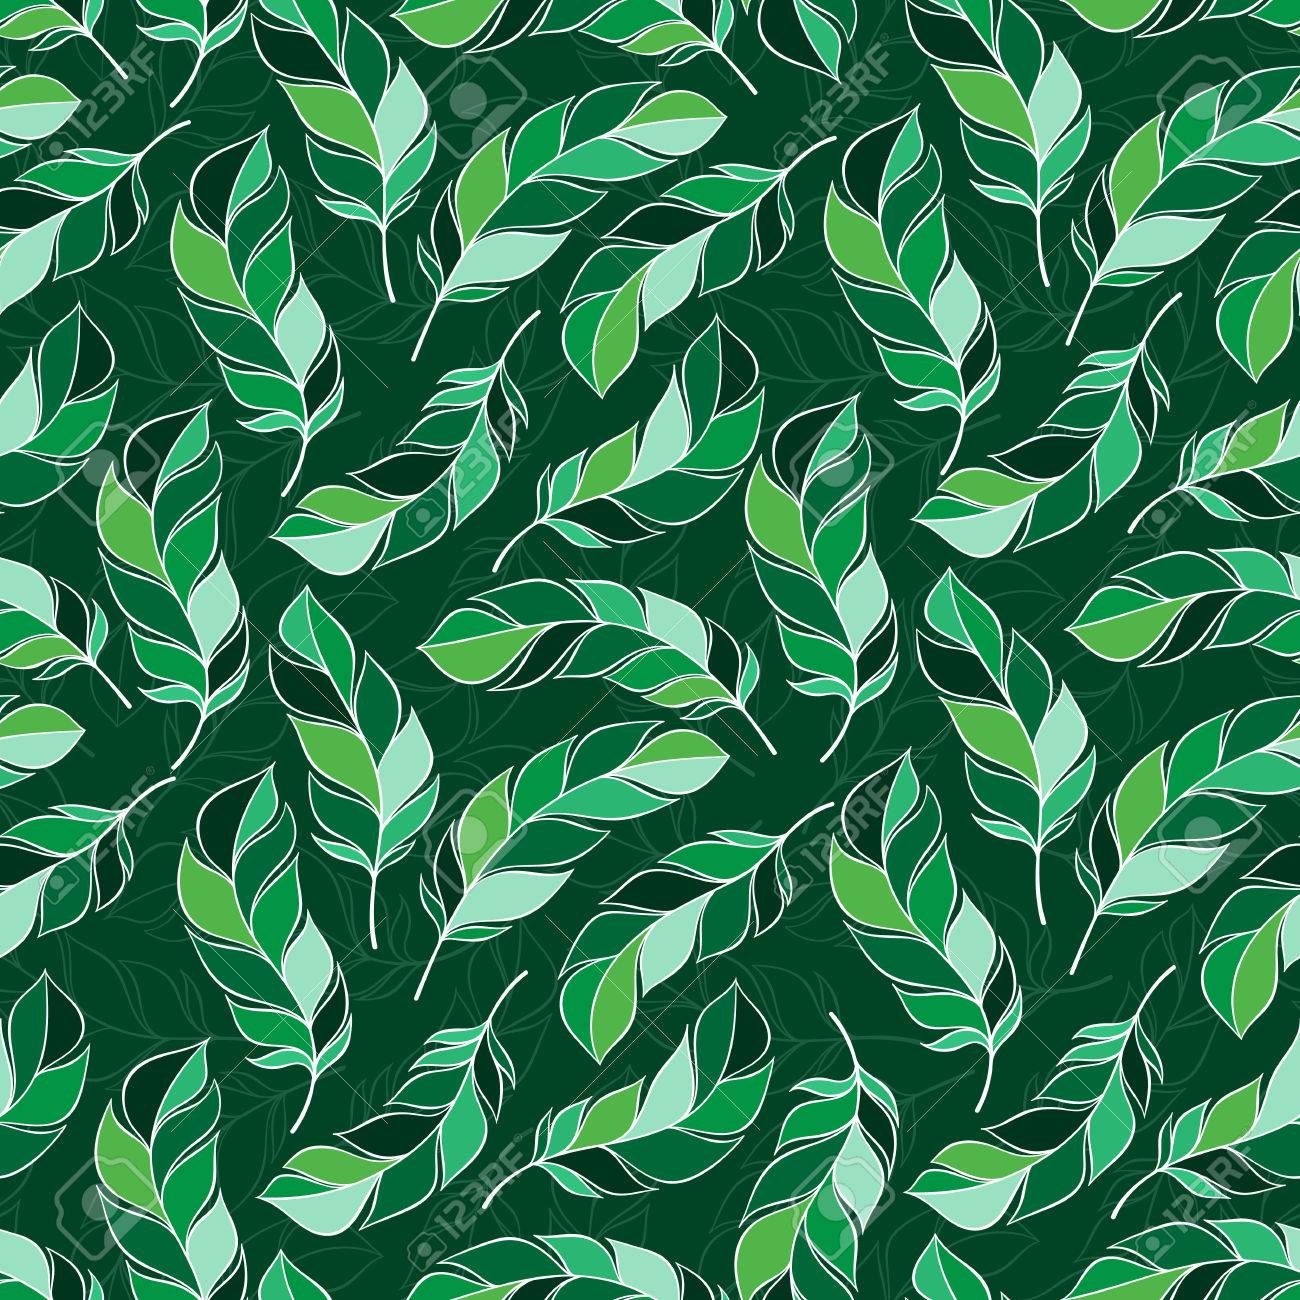 Vintage Seamless Pattern With Hand Drawn Feathers For Desktop